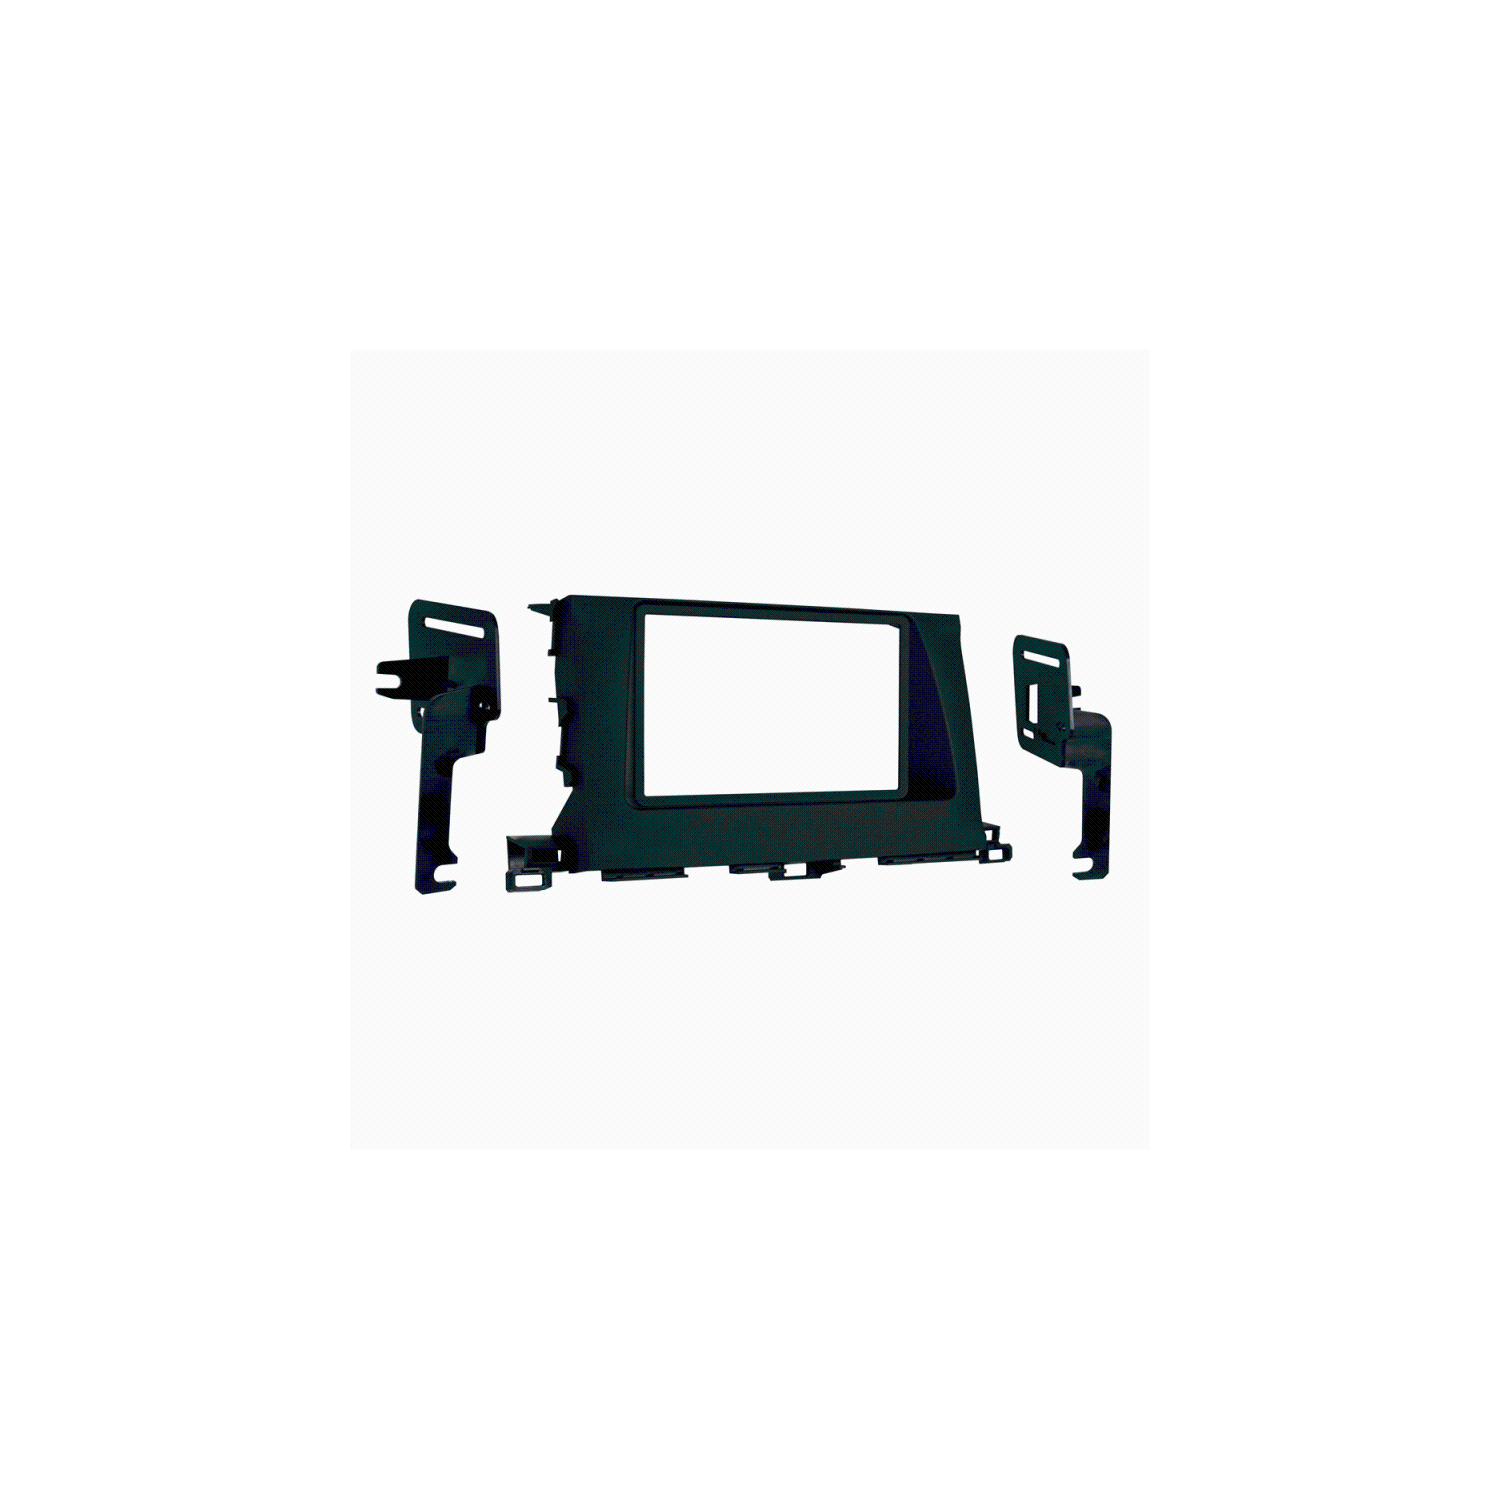 Metra 95-8248B Double DIN Dash Kit for Select 2014-Up Toyota Highlander Vehicles